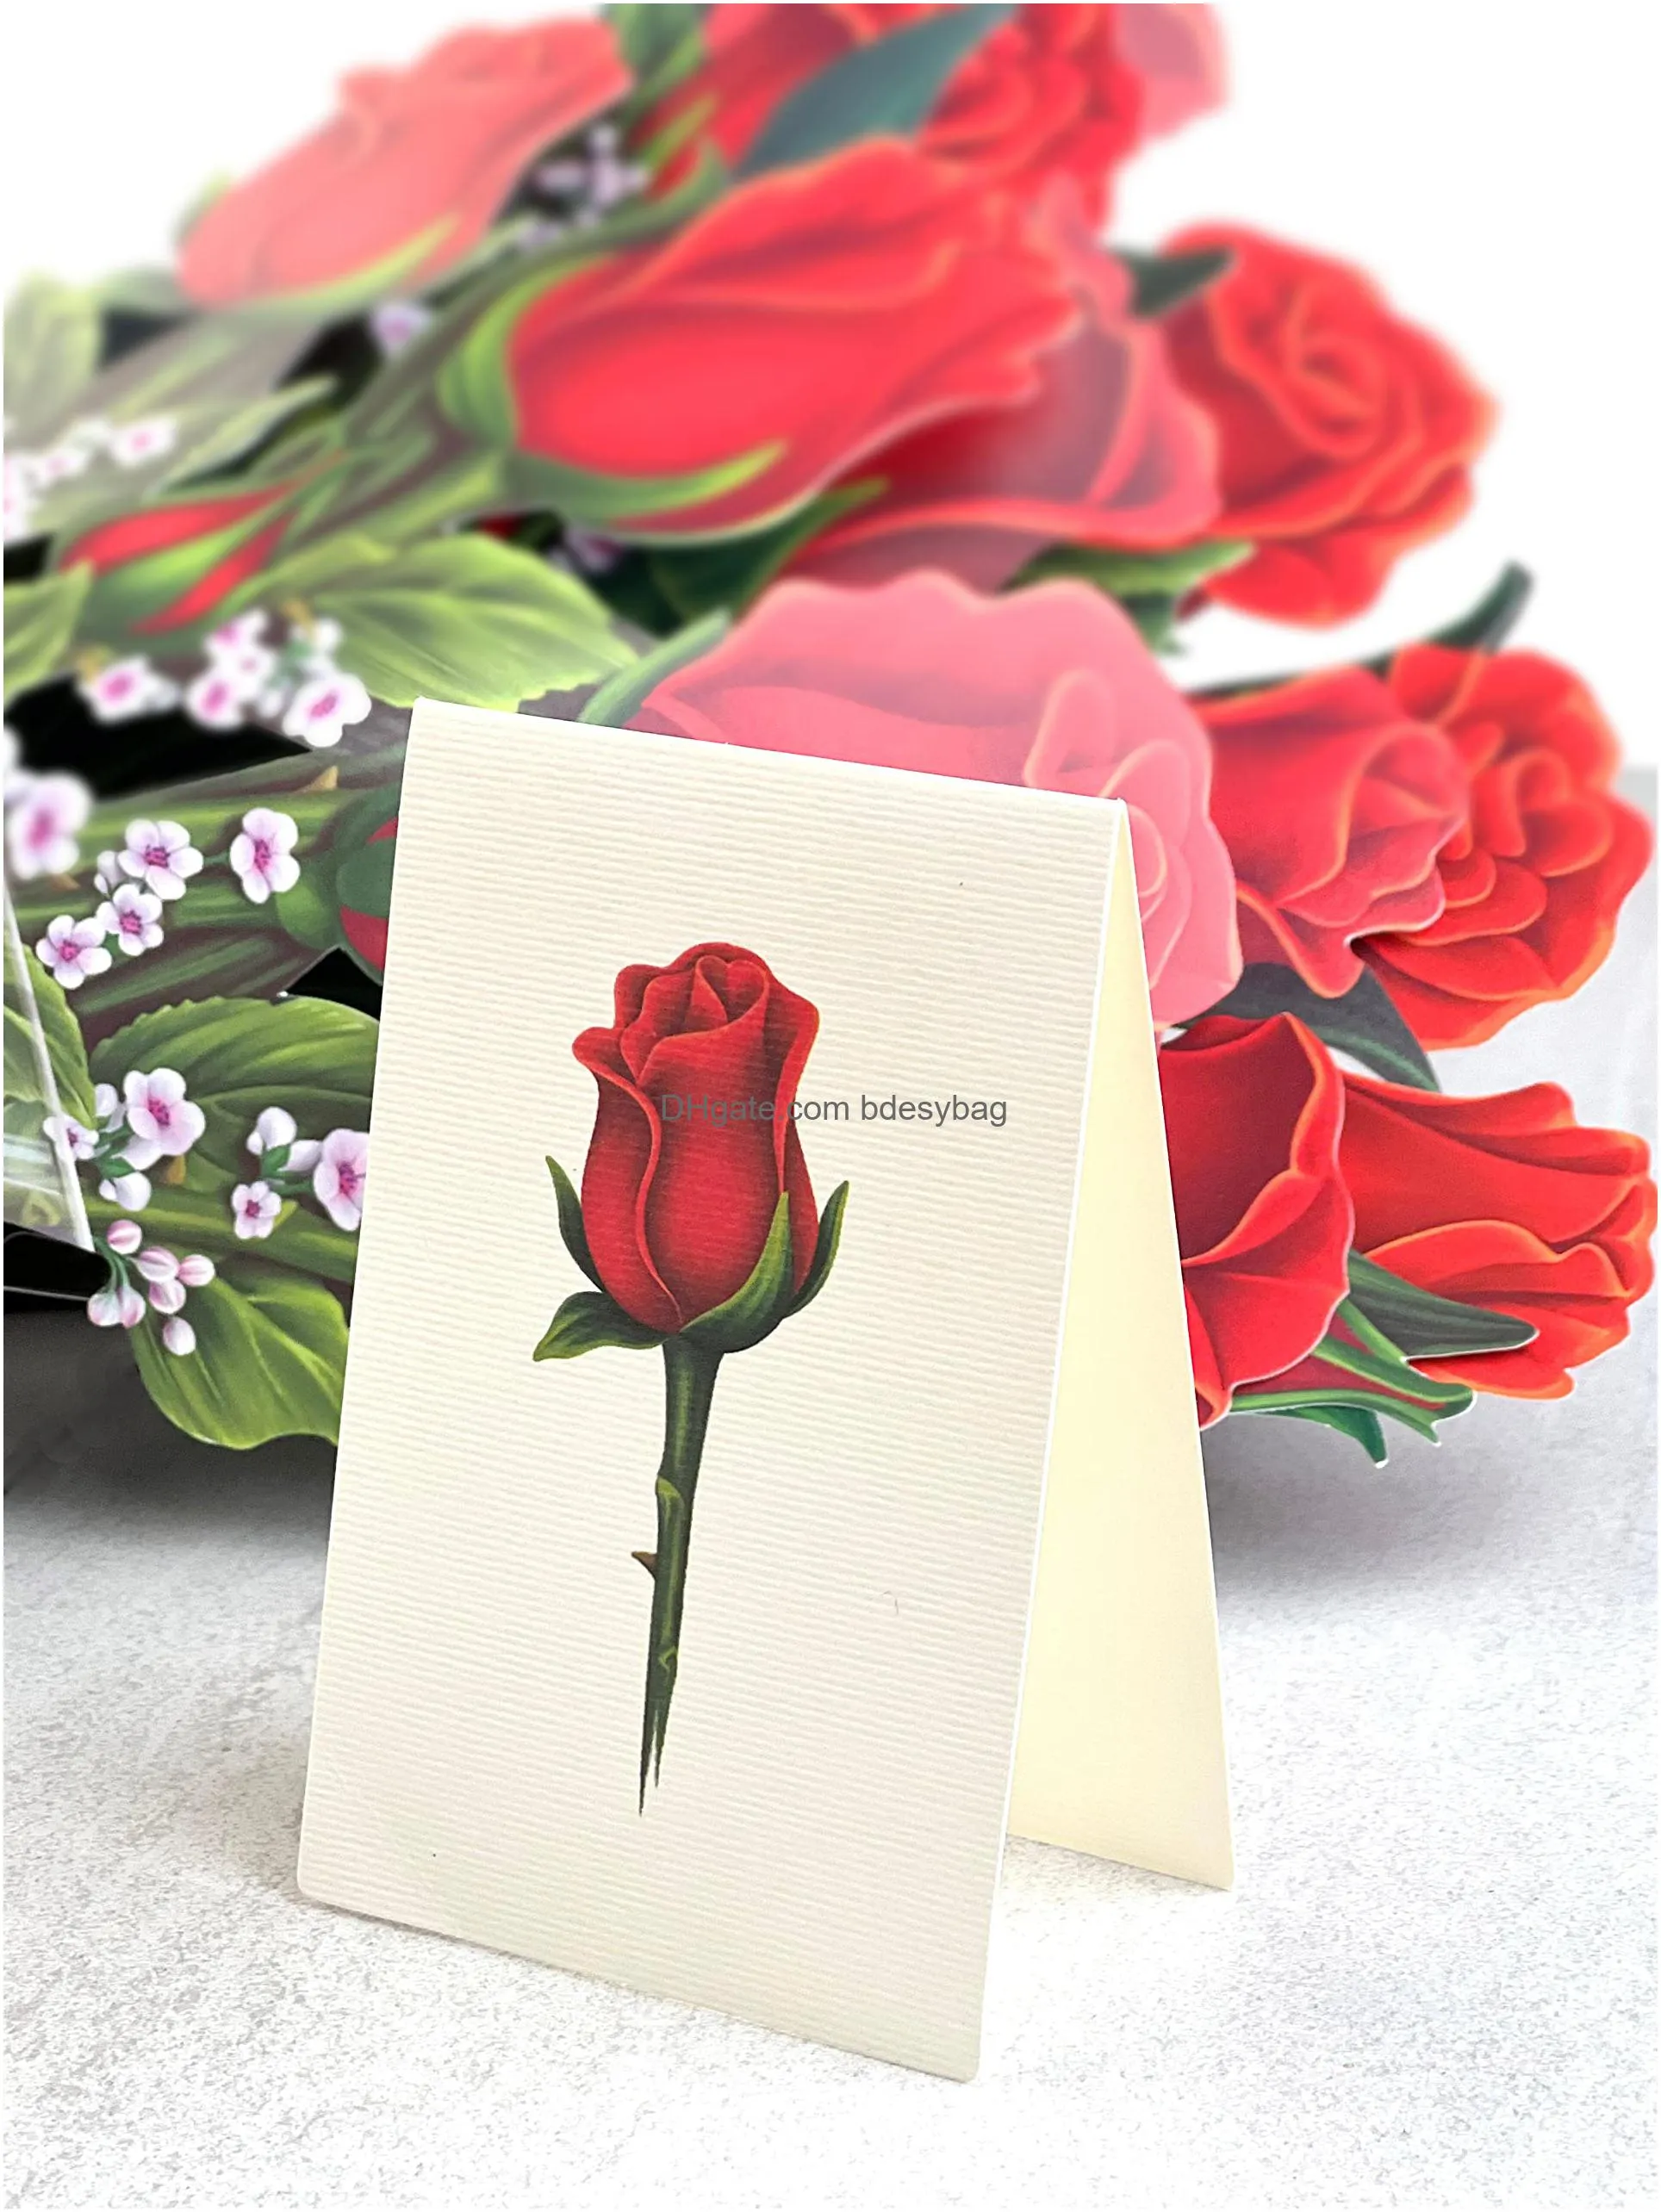  up cards red roses 12 inch life sized forever flower bouquet 3d popup paper flower anniversary greeting cards with note card and envelope